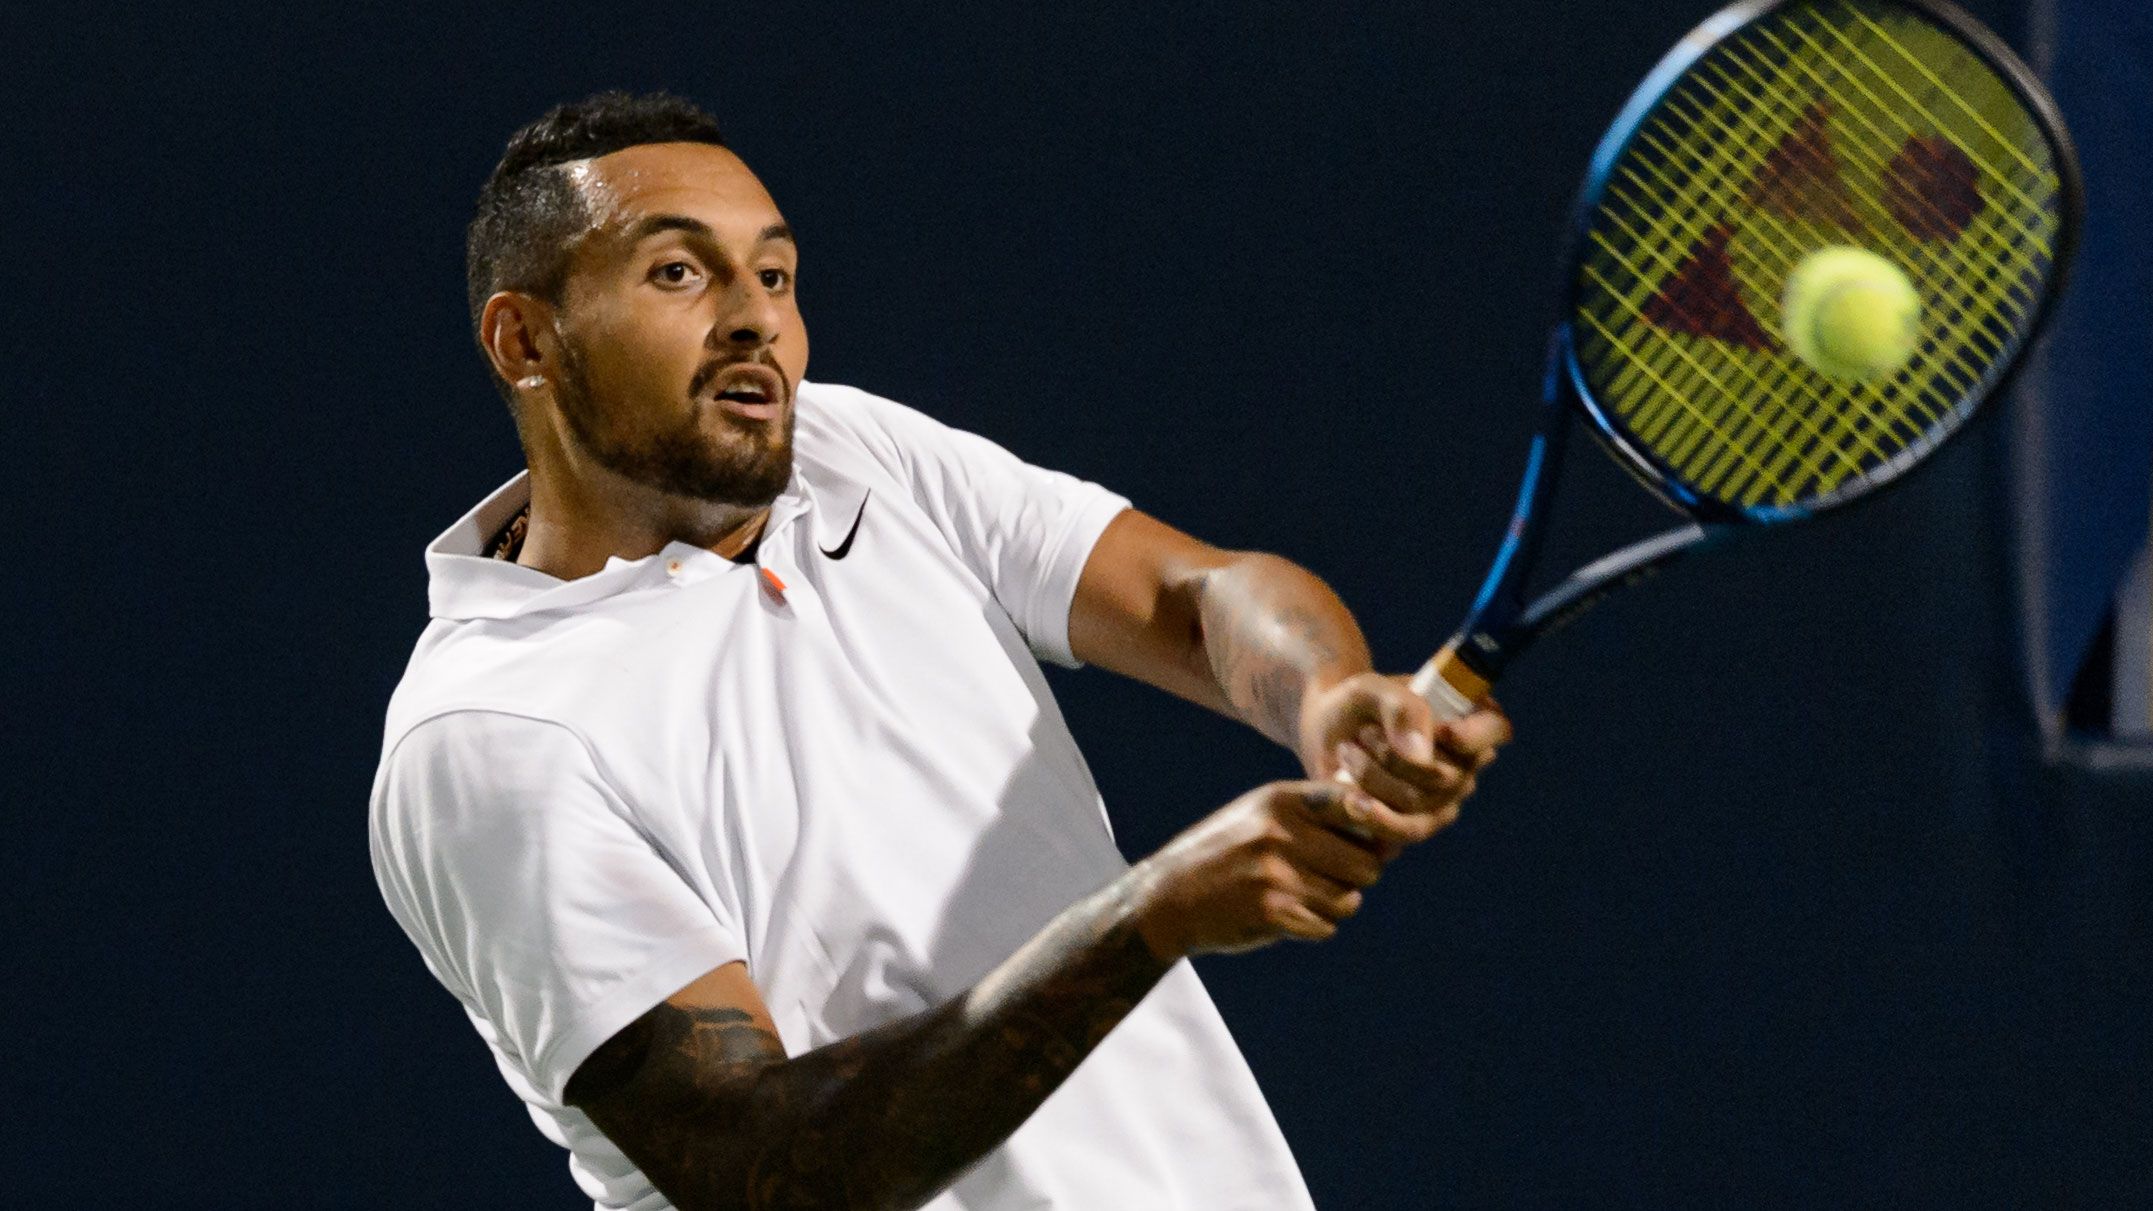 Live: Odds stacked against Kyrgios at US Open